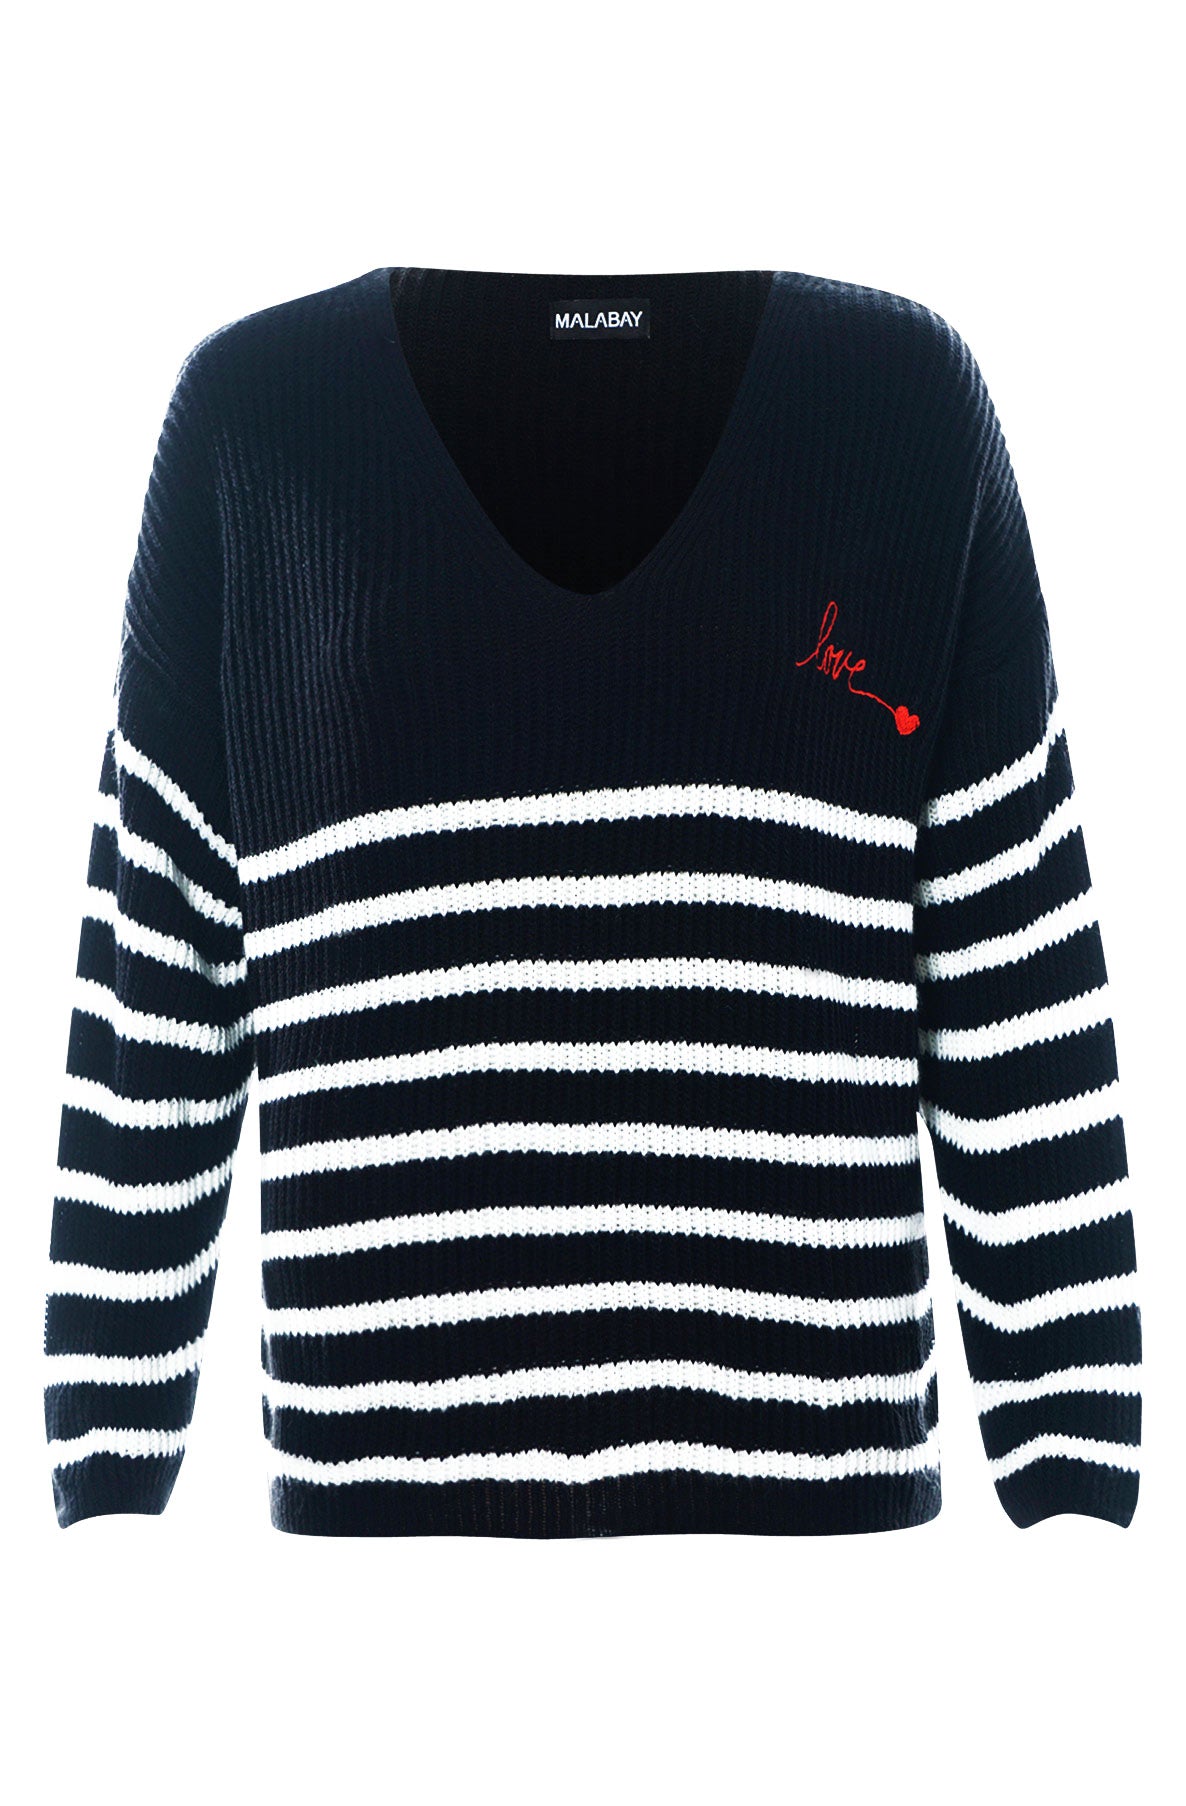 Leah Striped 'LOVE' Knitted Jumper Sweater Top-Black